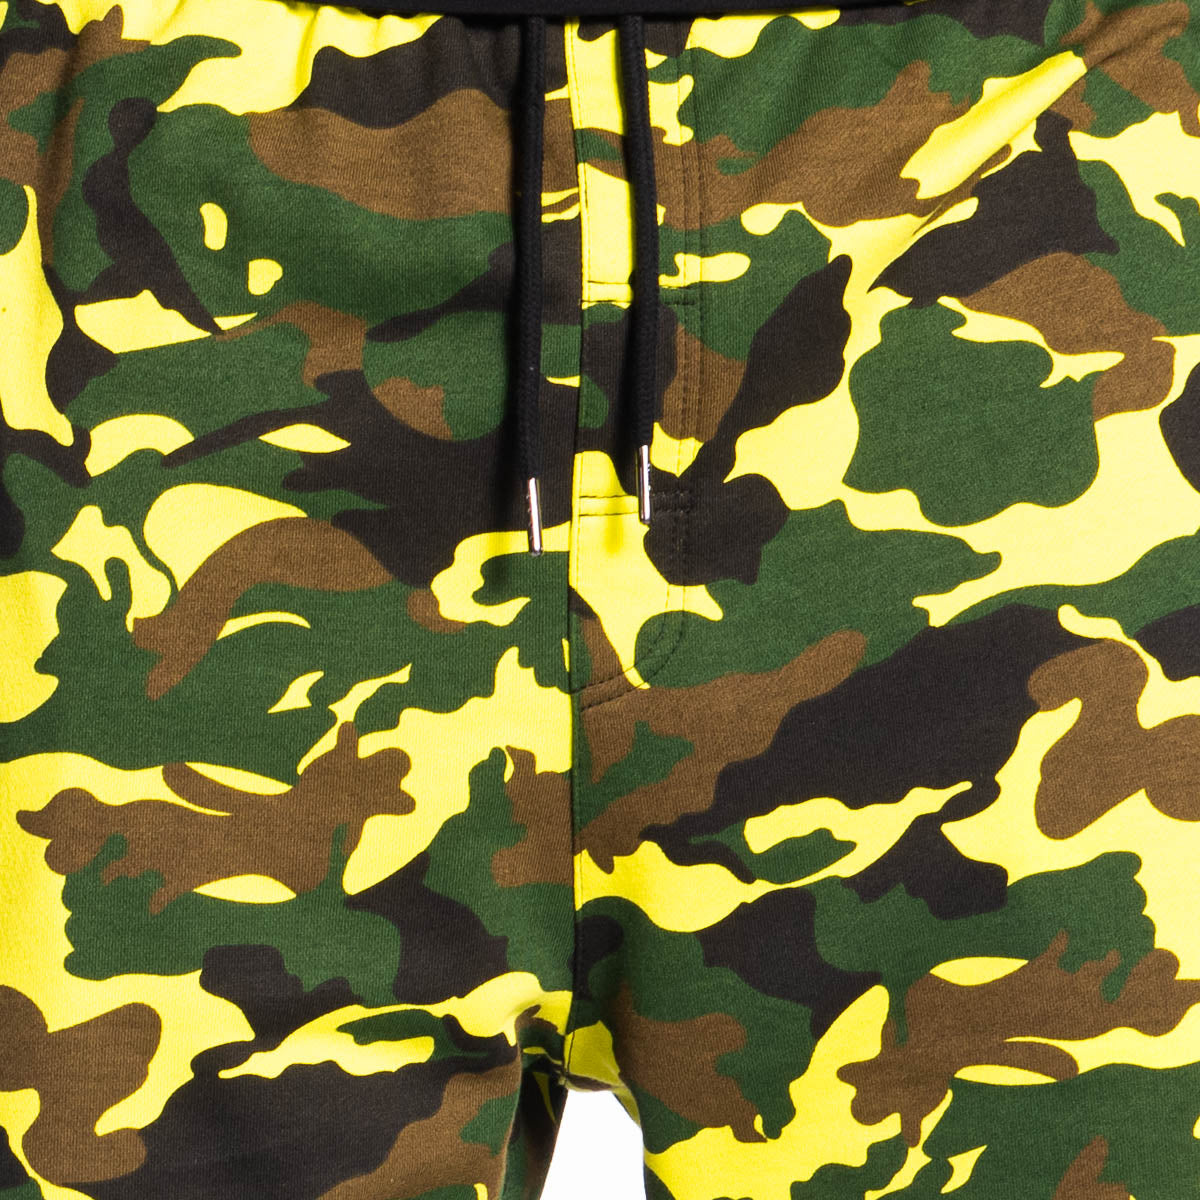 Camo French Terry Shorts